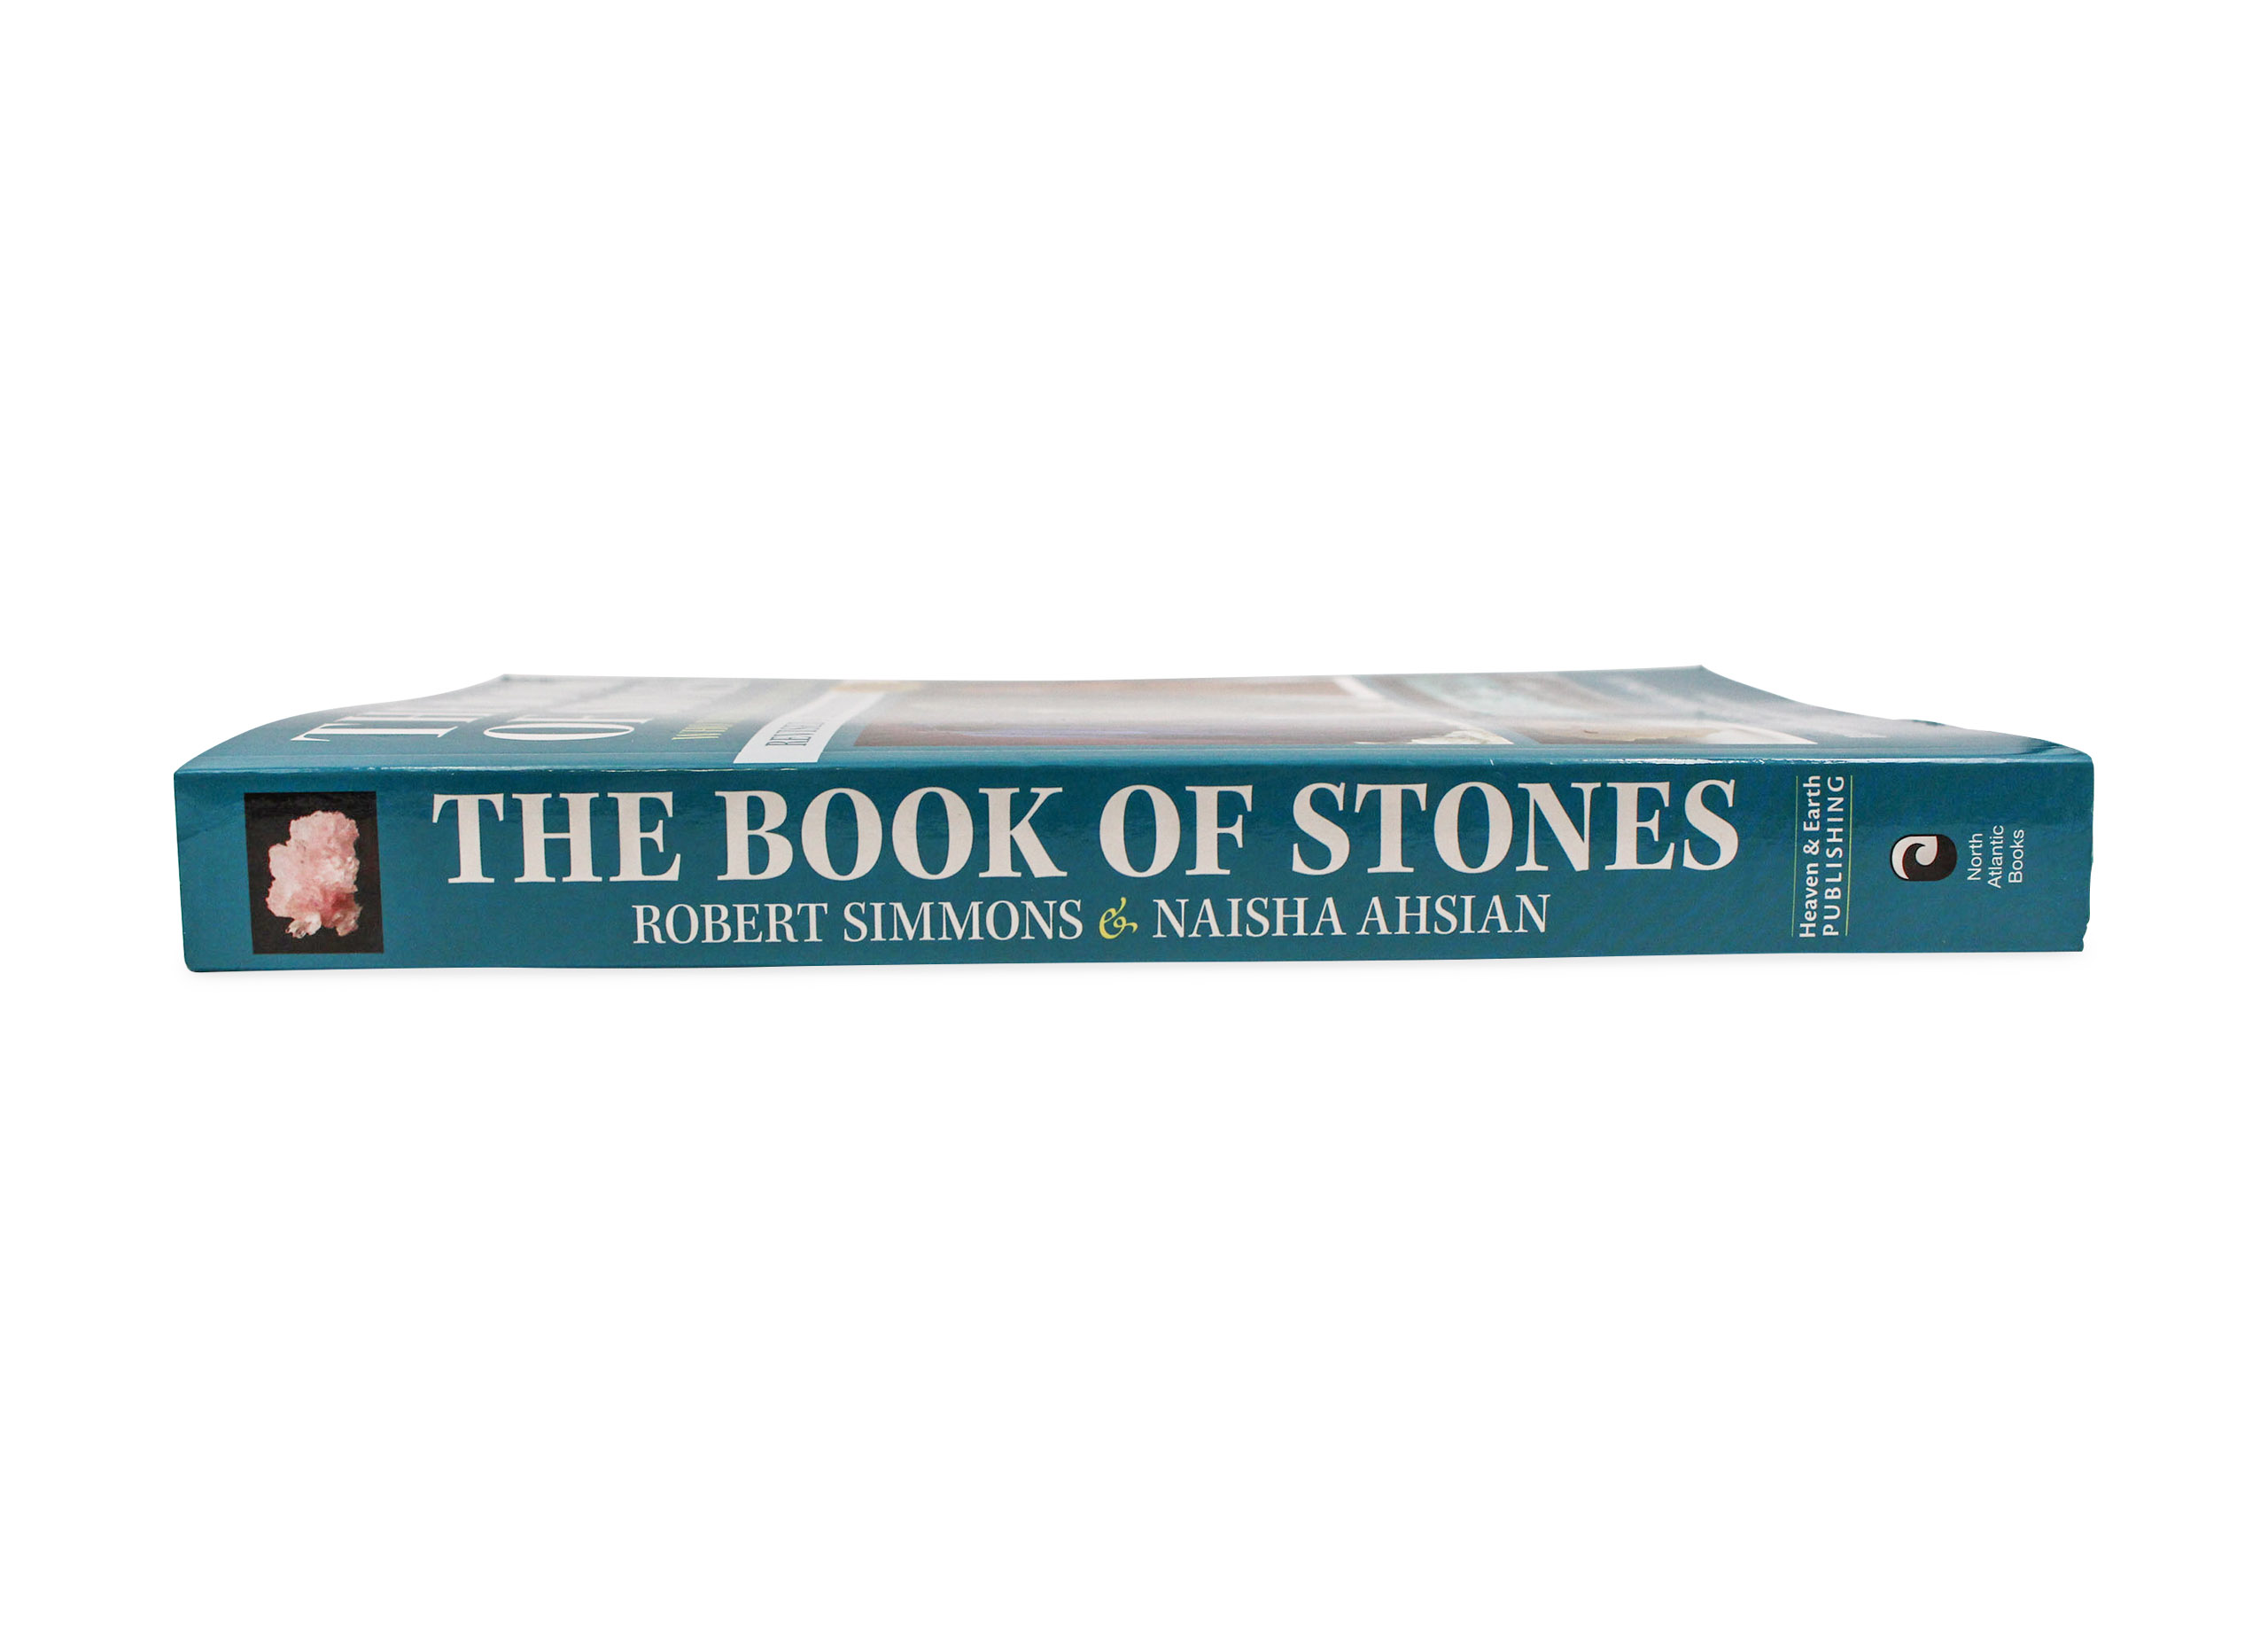 The Book of Stones Book - Crystal Dreams